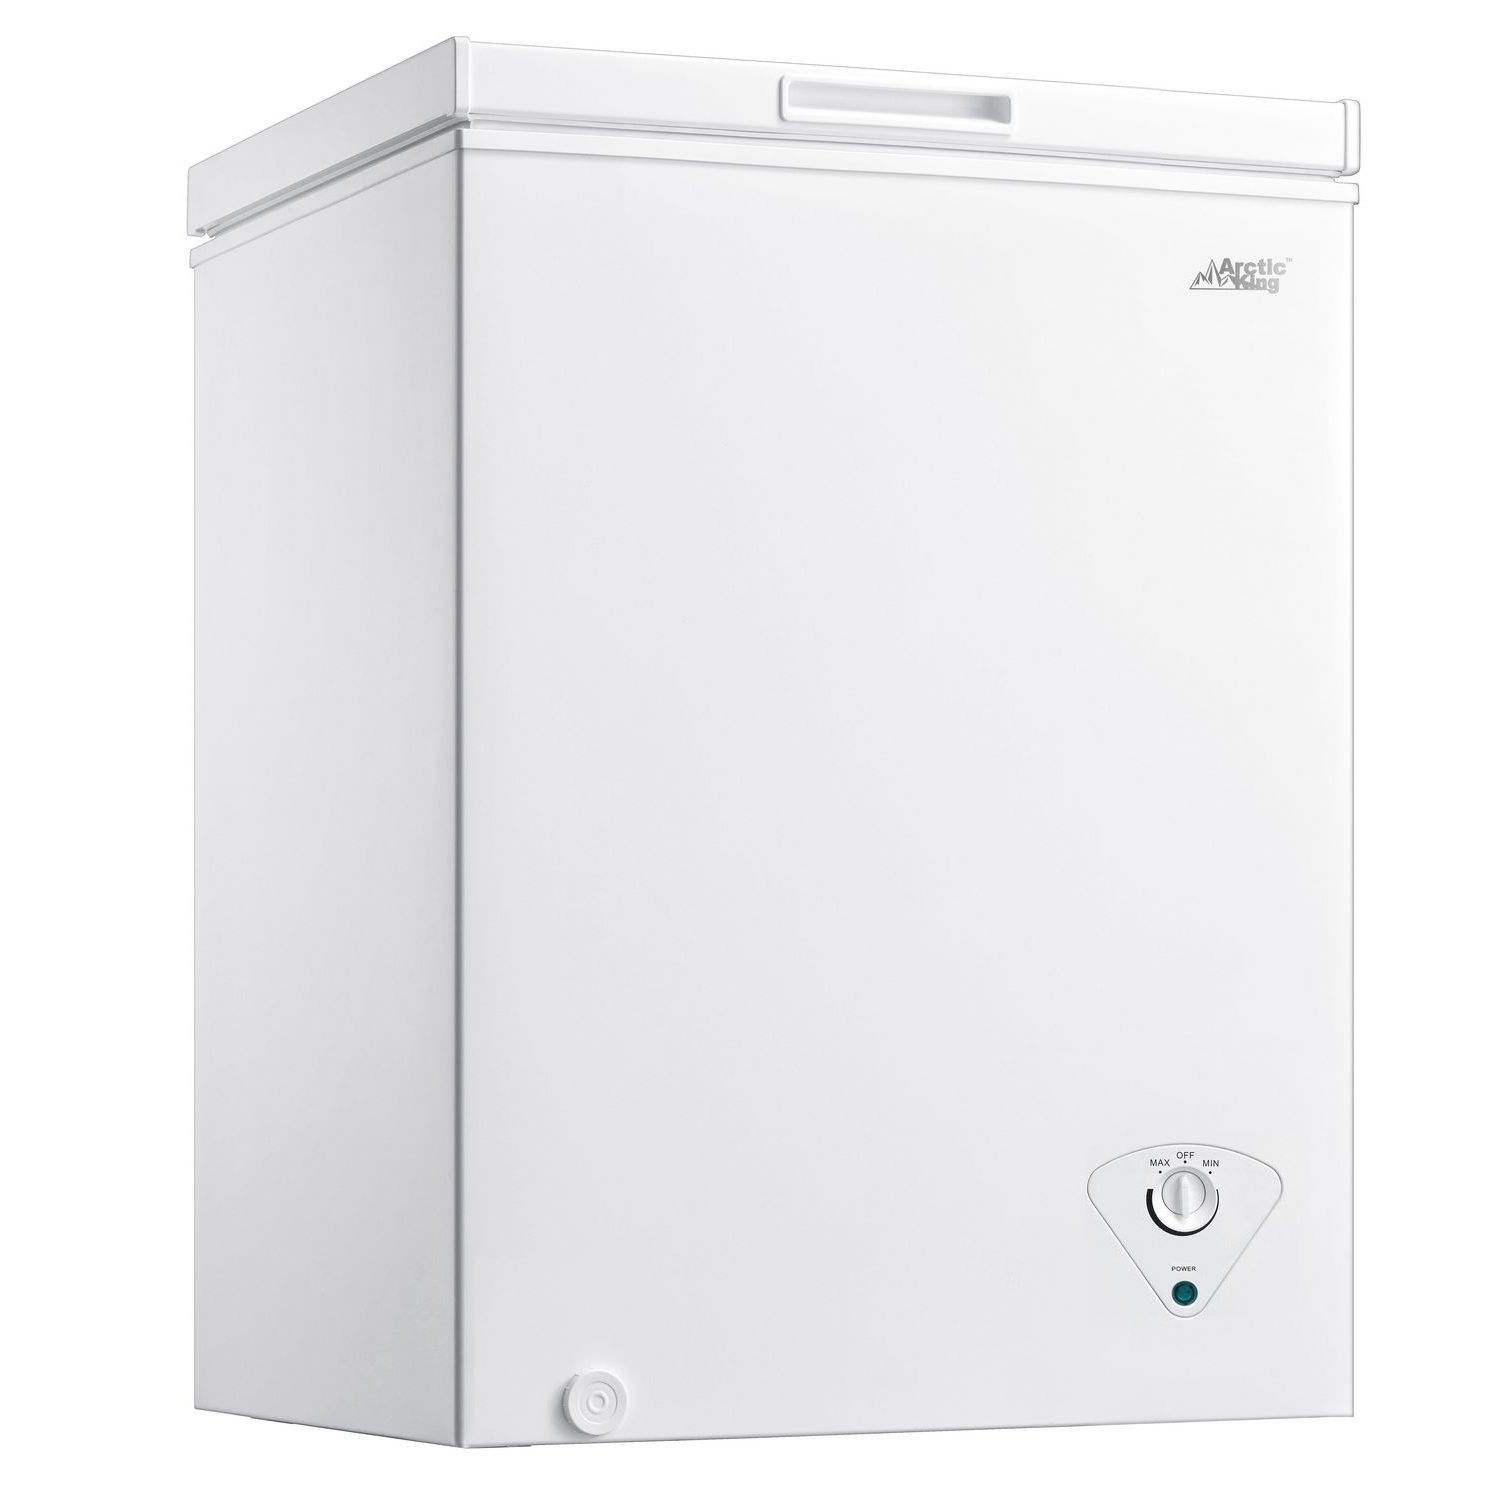 Arctic King 5.0 cu ft Chest Freezer - Adjustable Thermostat, Removable Basket, Accessible Defrost Drain, Perfect For Medium Spaces - white